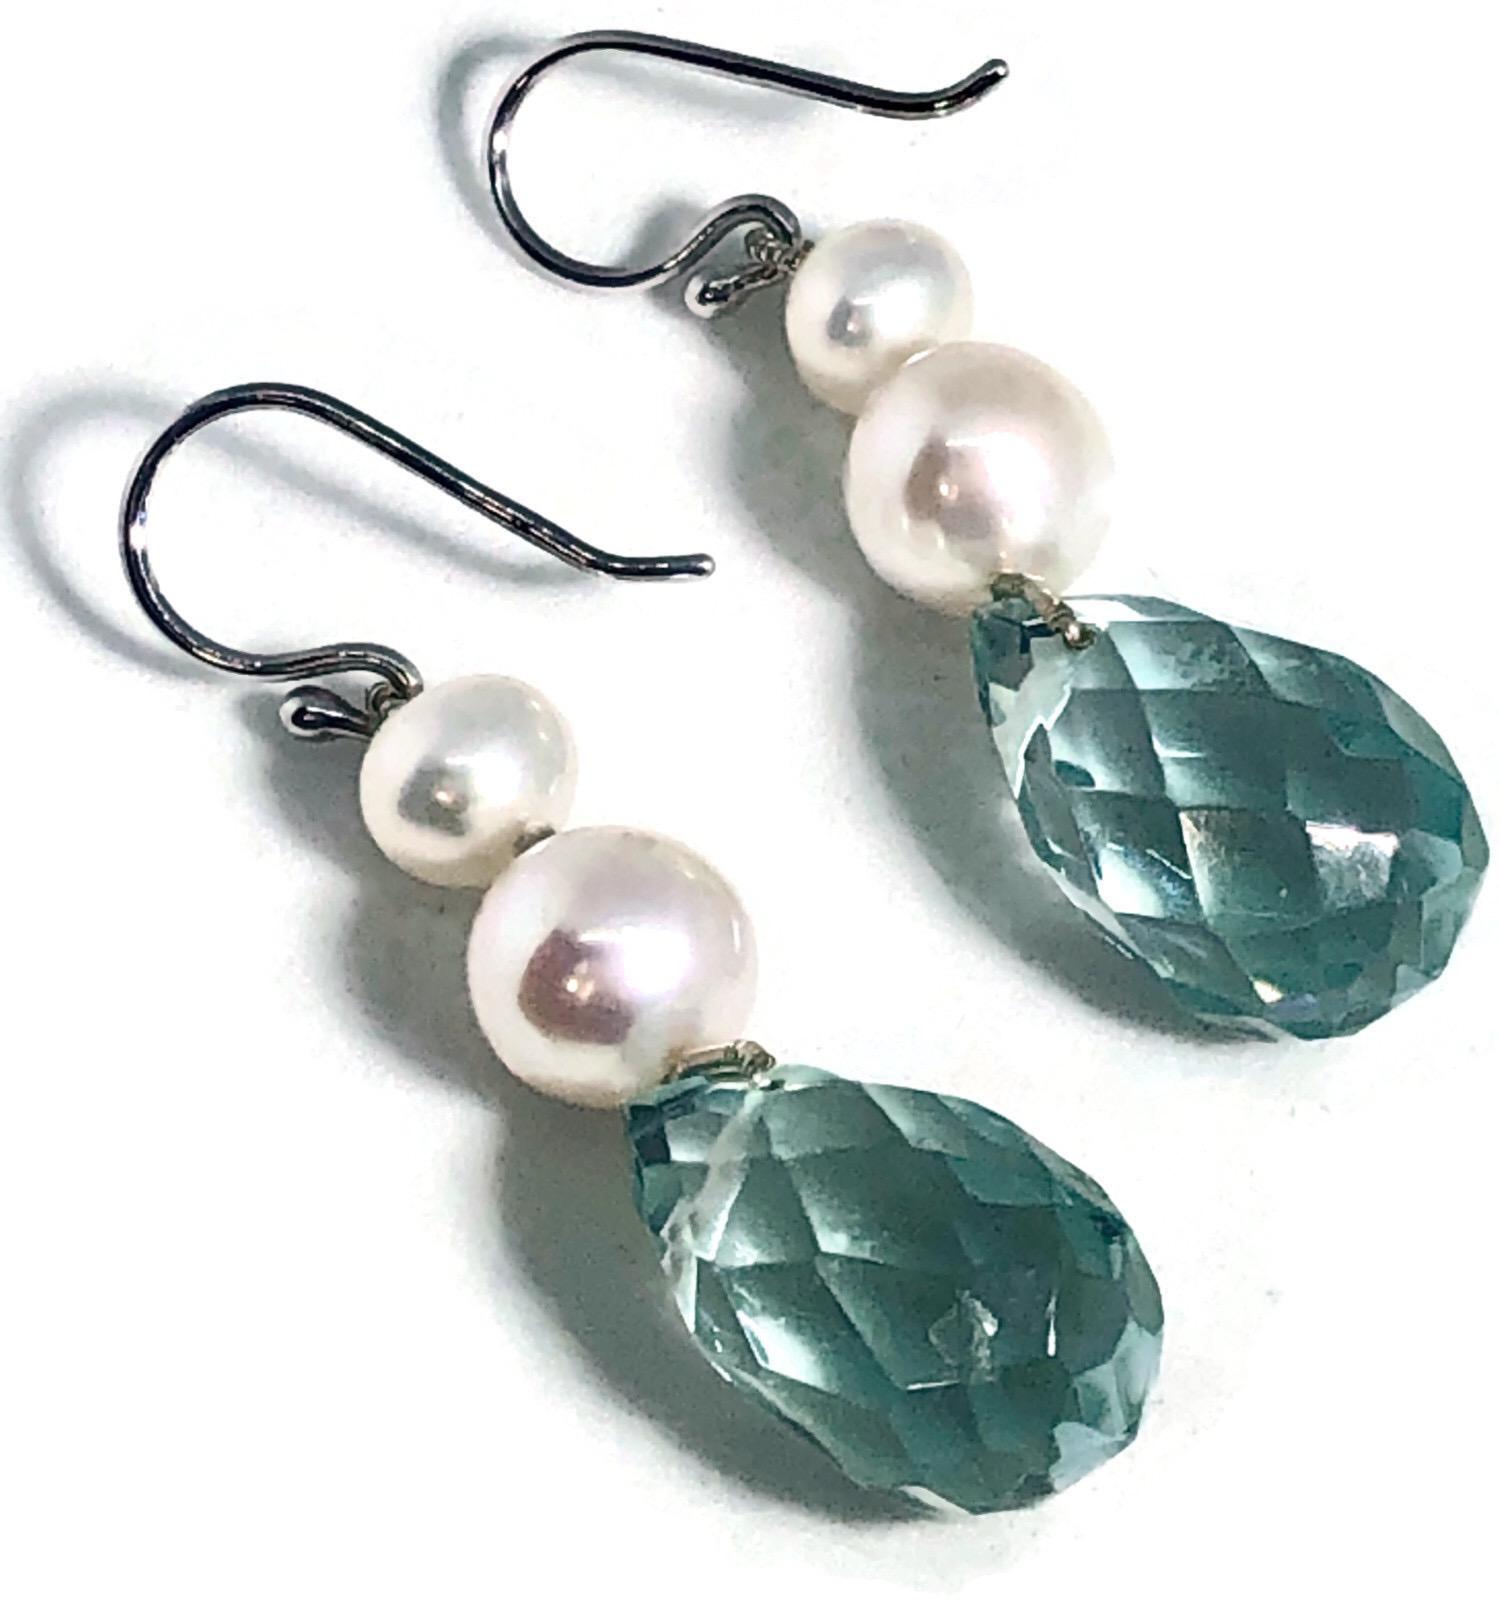 Beautiful by themselves with a simple pearl necklace or as a matching earring to the Akoya pearl necklace with 5 faceted briolettes, these earrings are so flattering and comfortable to wear.

Appropriate for a formal affair or everyday use, the blue